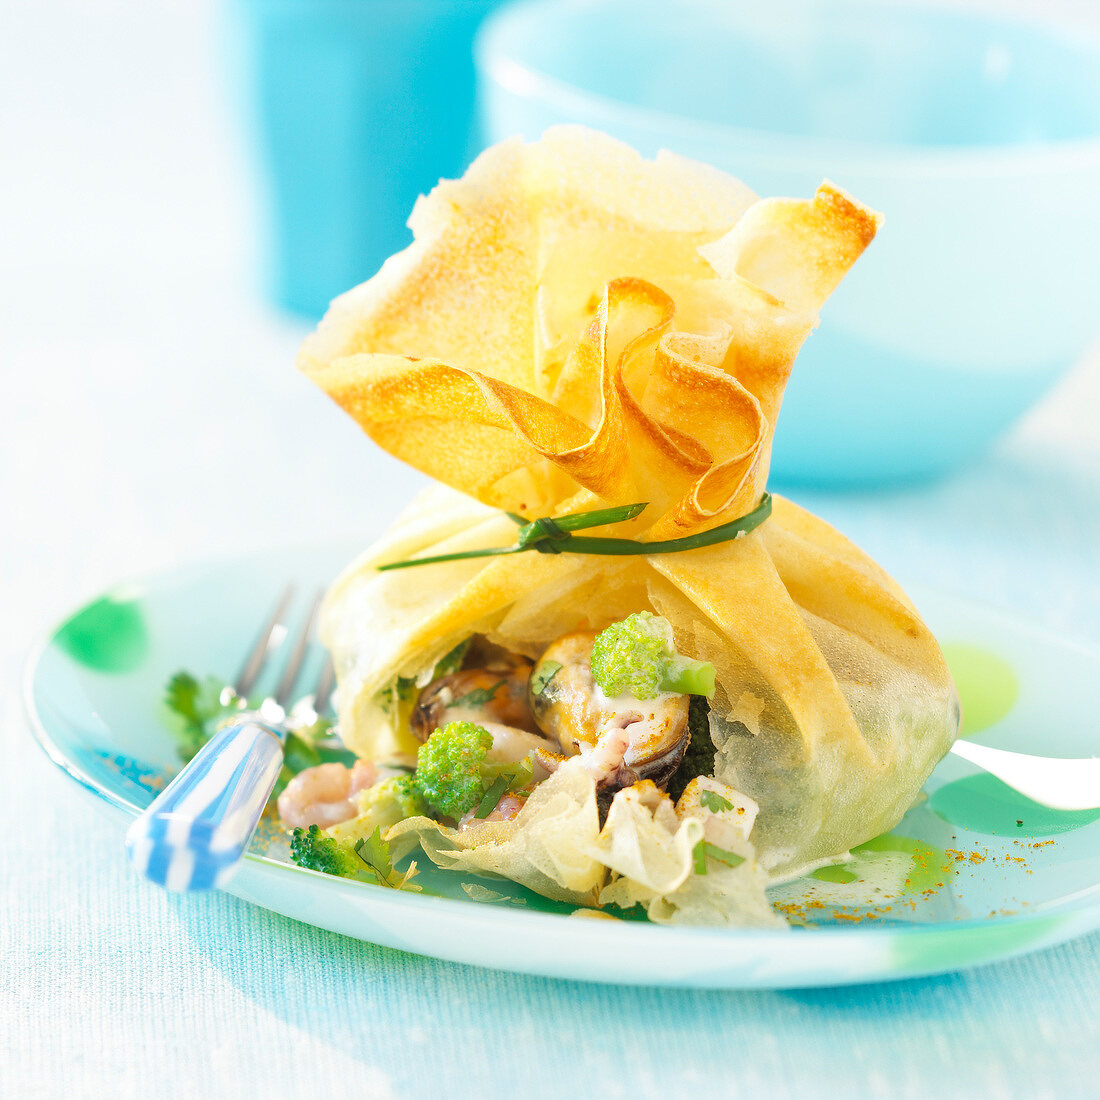 Seafood and broccoli filo pastry purse